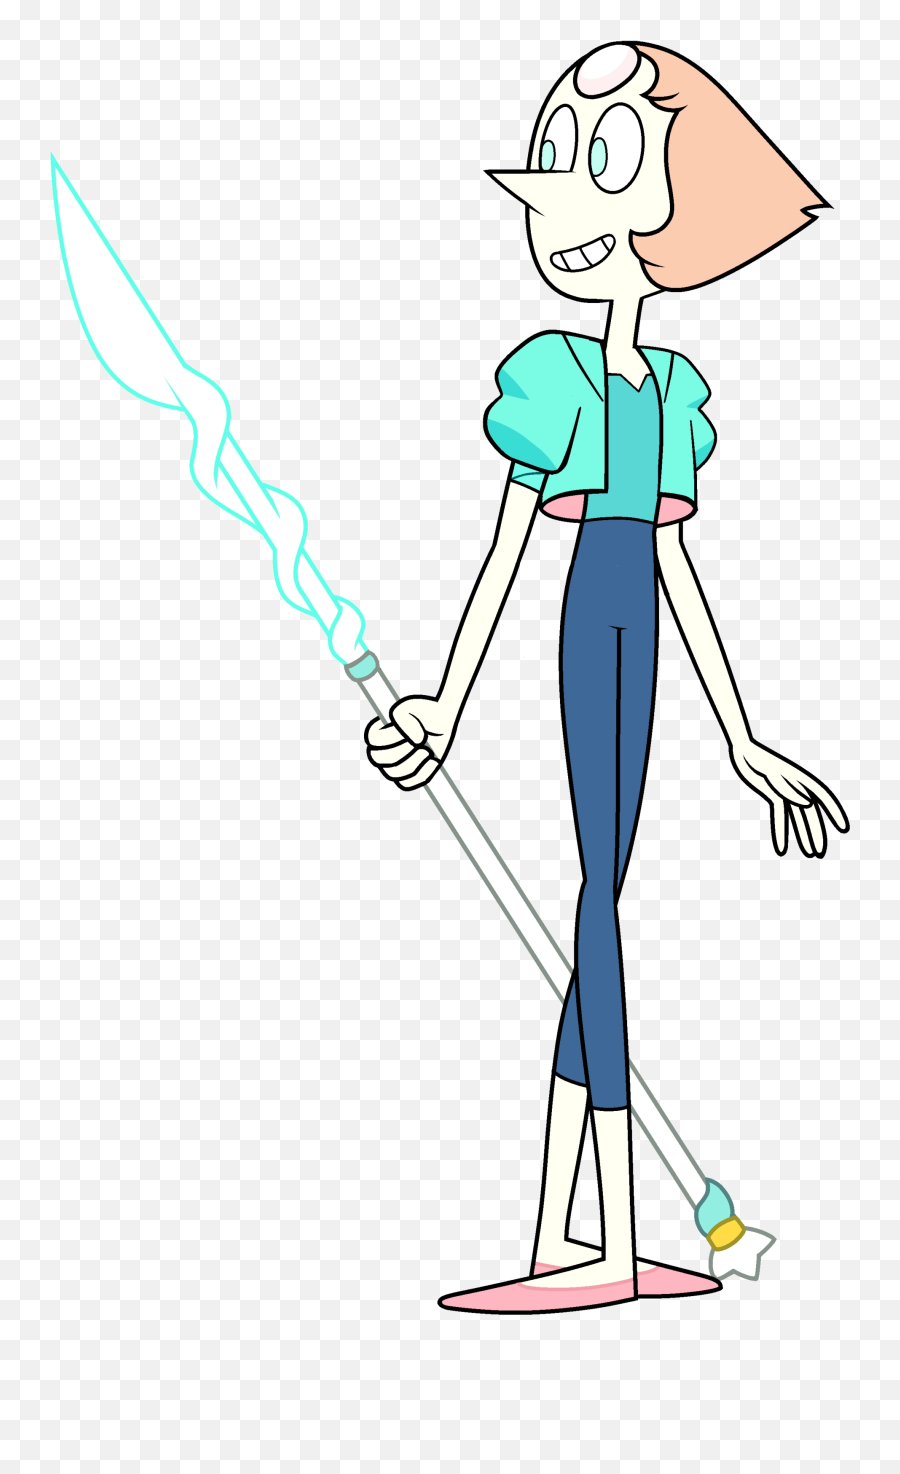 Download Free Png Pearl Steven Universe Wiki Fandom - Pearl Steven Universe Characters,Steven Universe Png